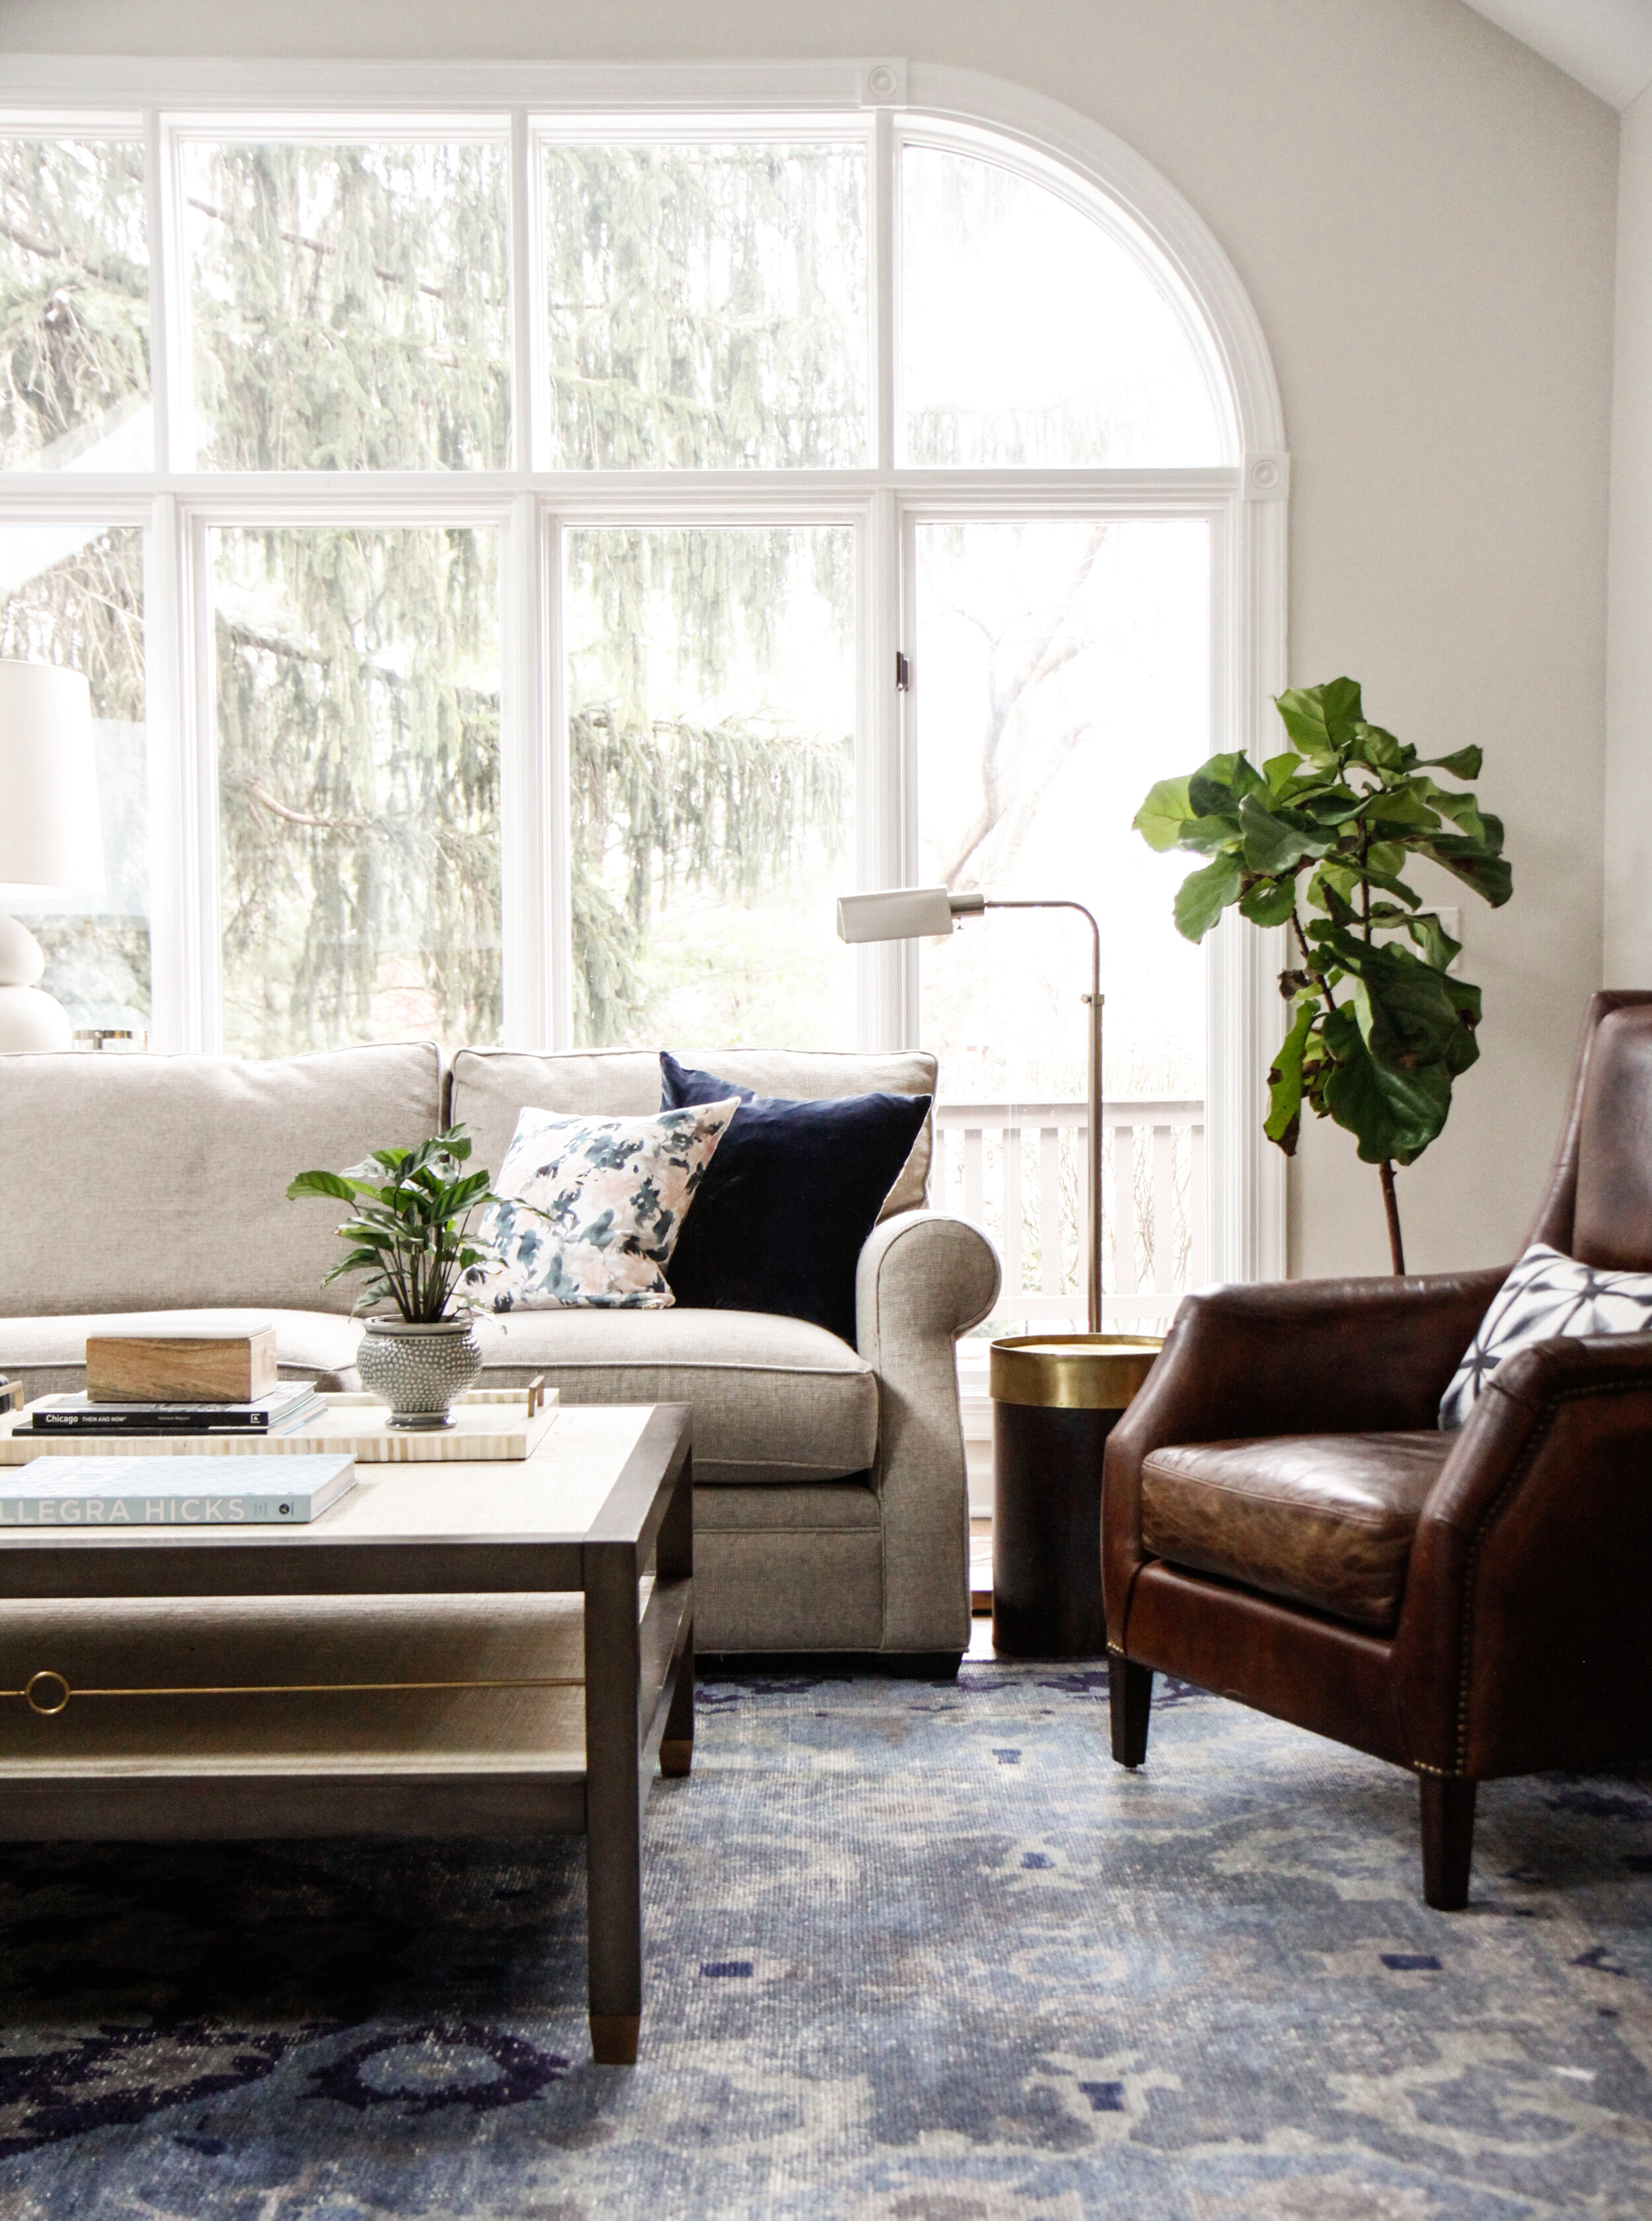 READER Q: SHOULD MY LIVING ROOM PILLOWS MATCH OR BE A VARIETY